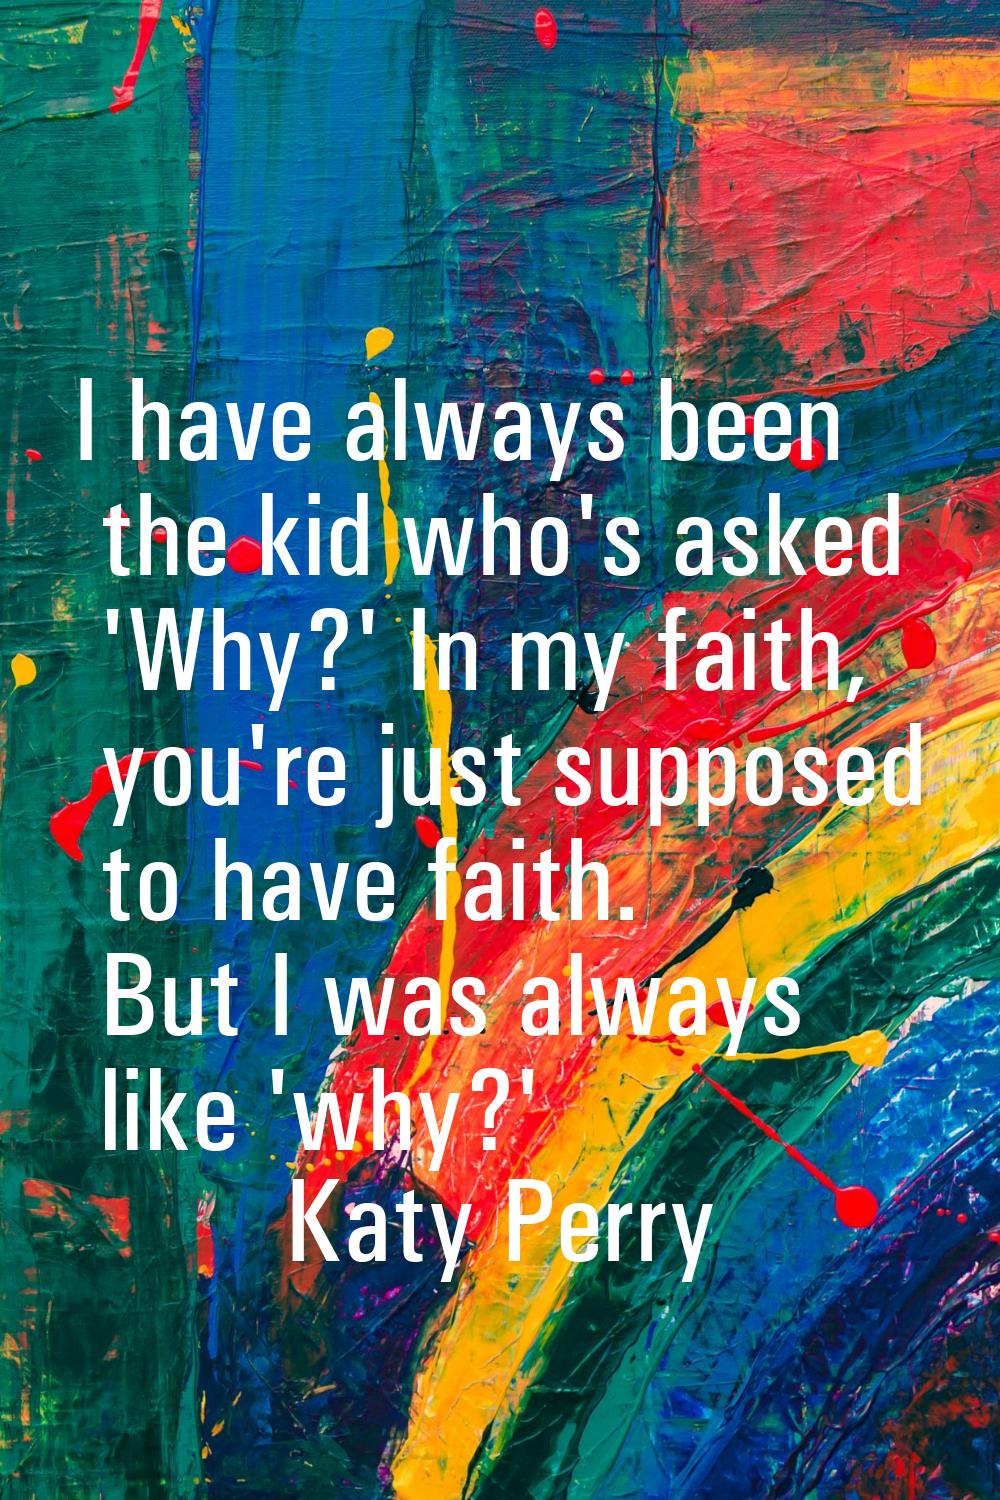 I have always been the kid who's asked 'Why?' In my faith, you're just supposed to have faith. But 